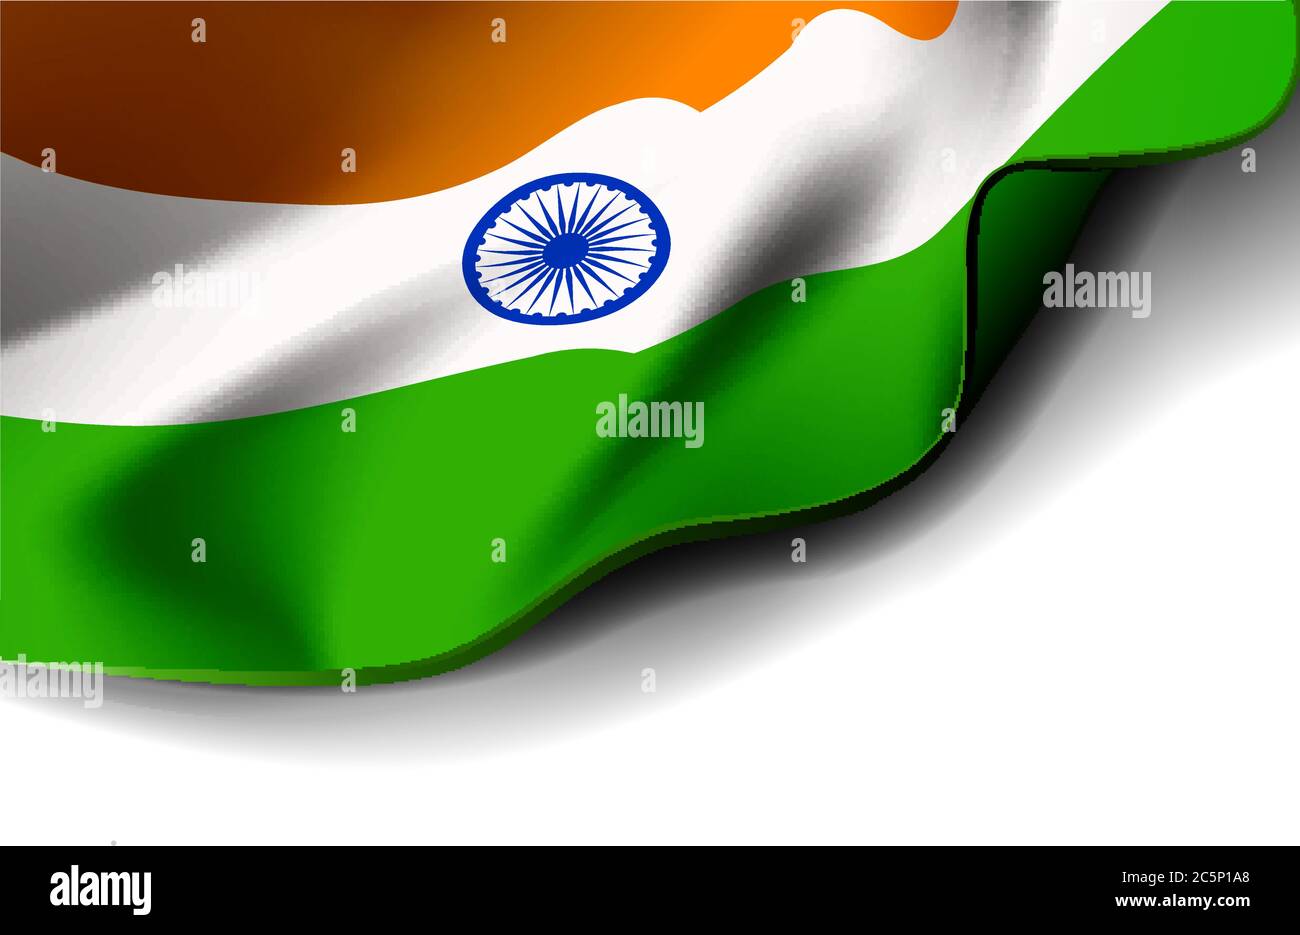 Waving flag of india Vector illustration on white background Stock Vector